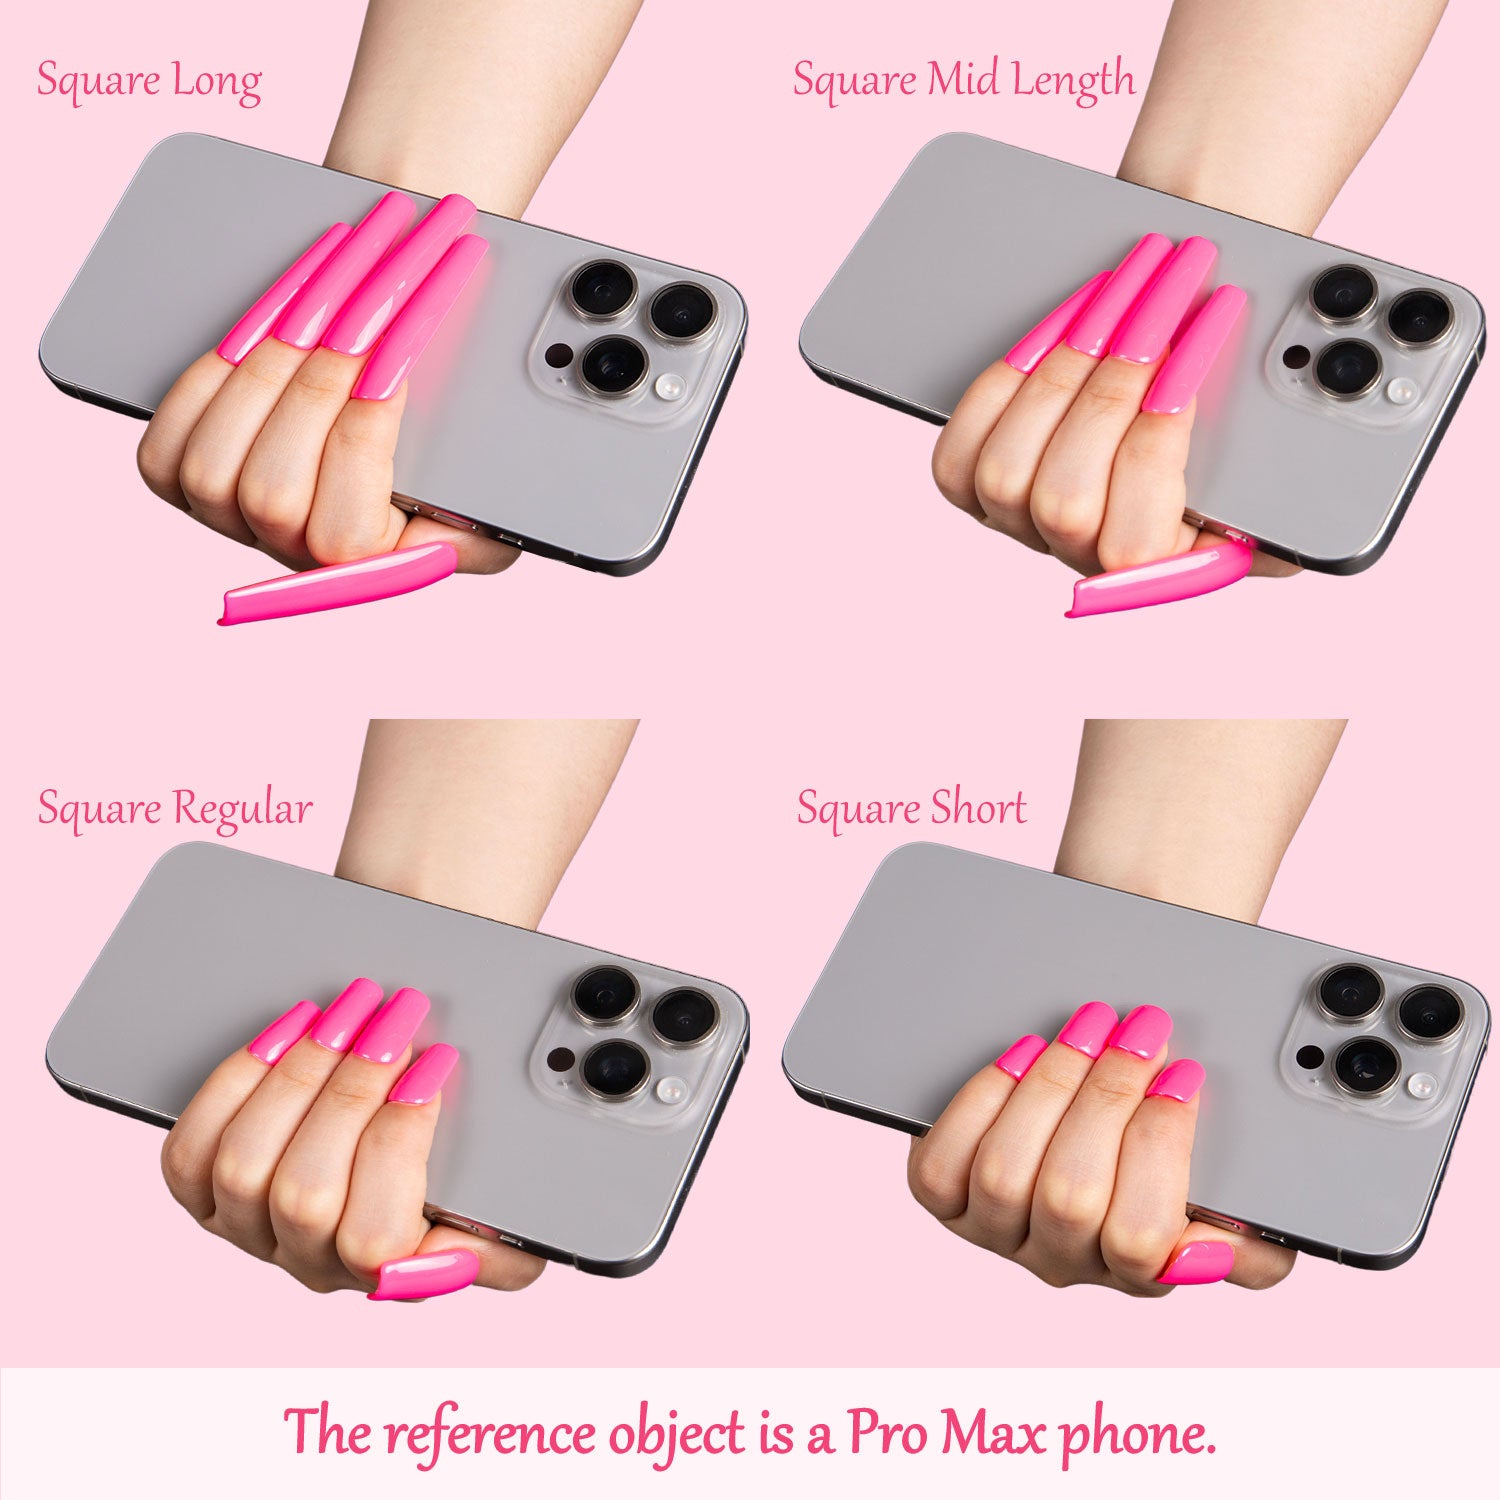 Comparison of 'Lovely Kitten Heels' press-on nails in Square shapes, featuring Square Long, Square Mid Length, Square Regular, and Square Short lengths, displayed on a hand holding a Pro Max phone, all in vibrant pink color.